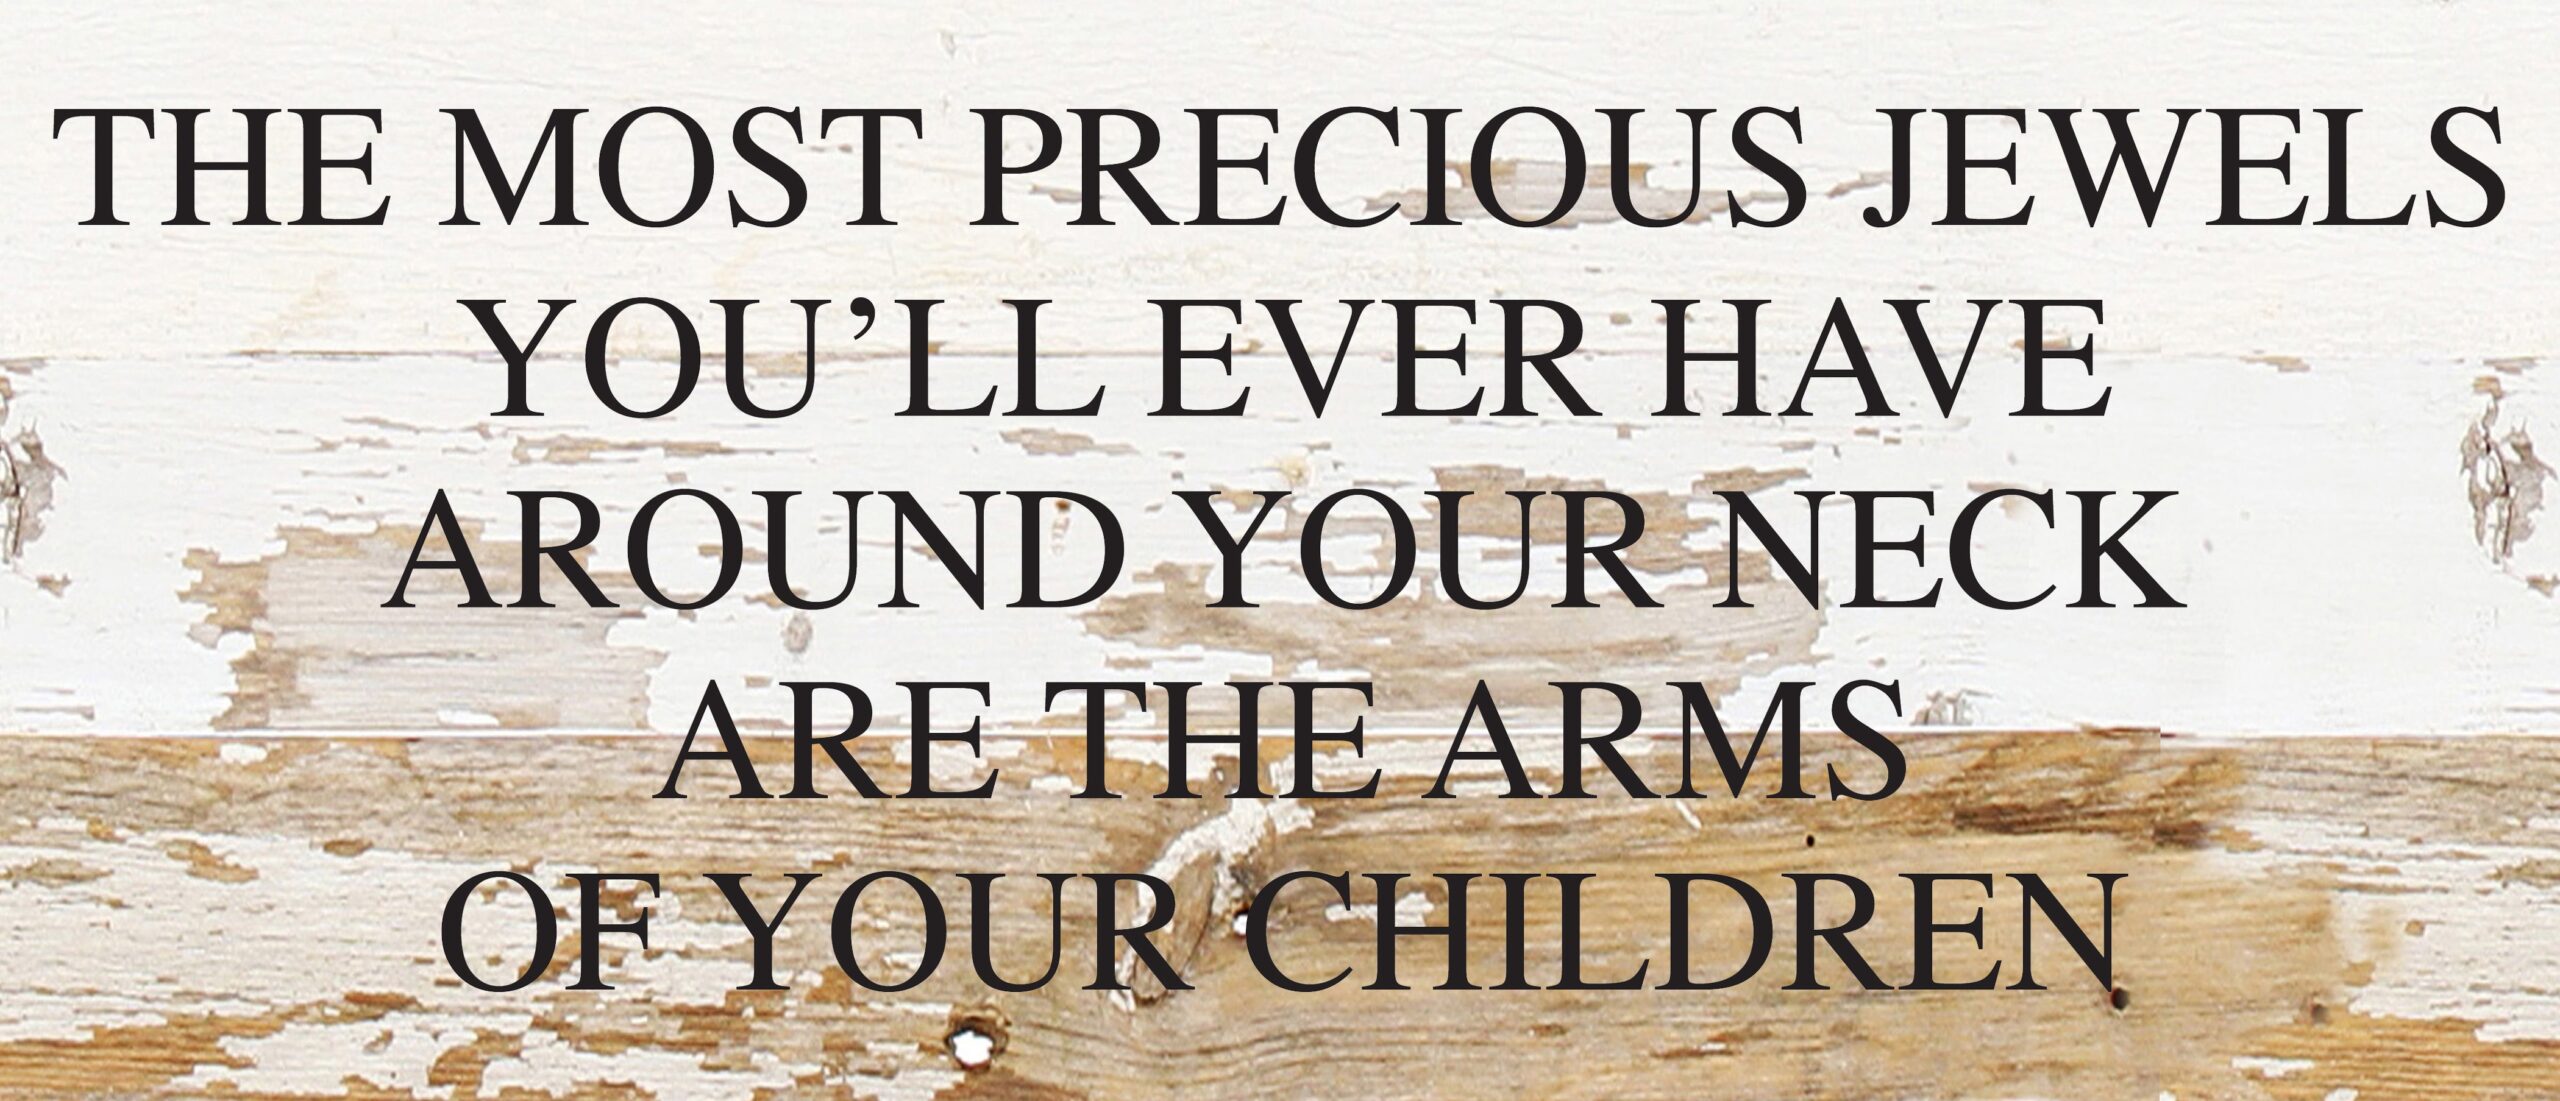 The most precious jewels you'll ever have around your neck are the arms of your children / 14"x6" Reclaimed Wood Sign